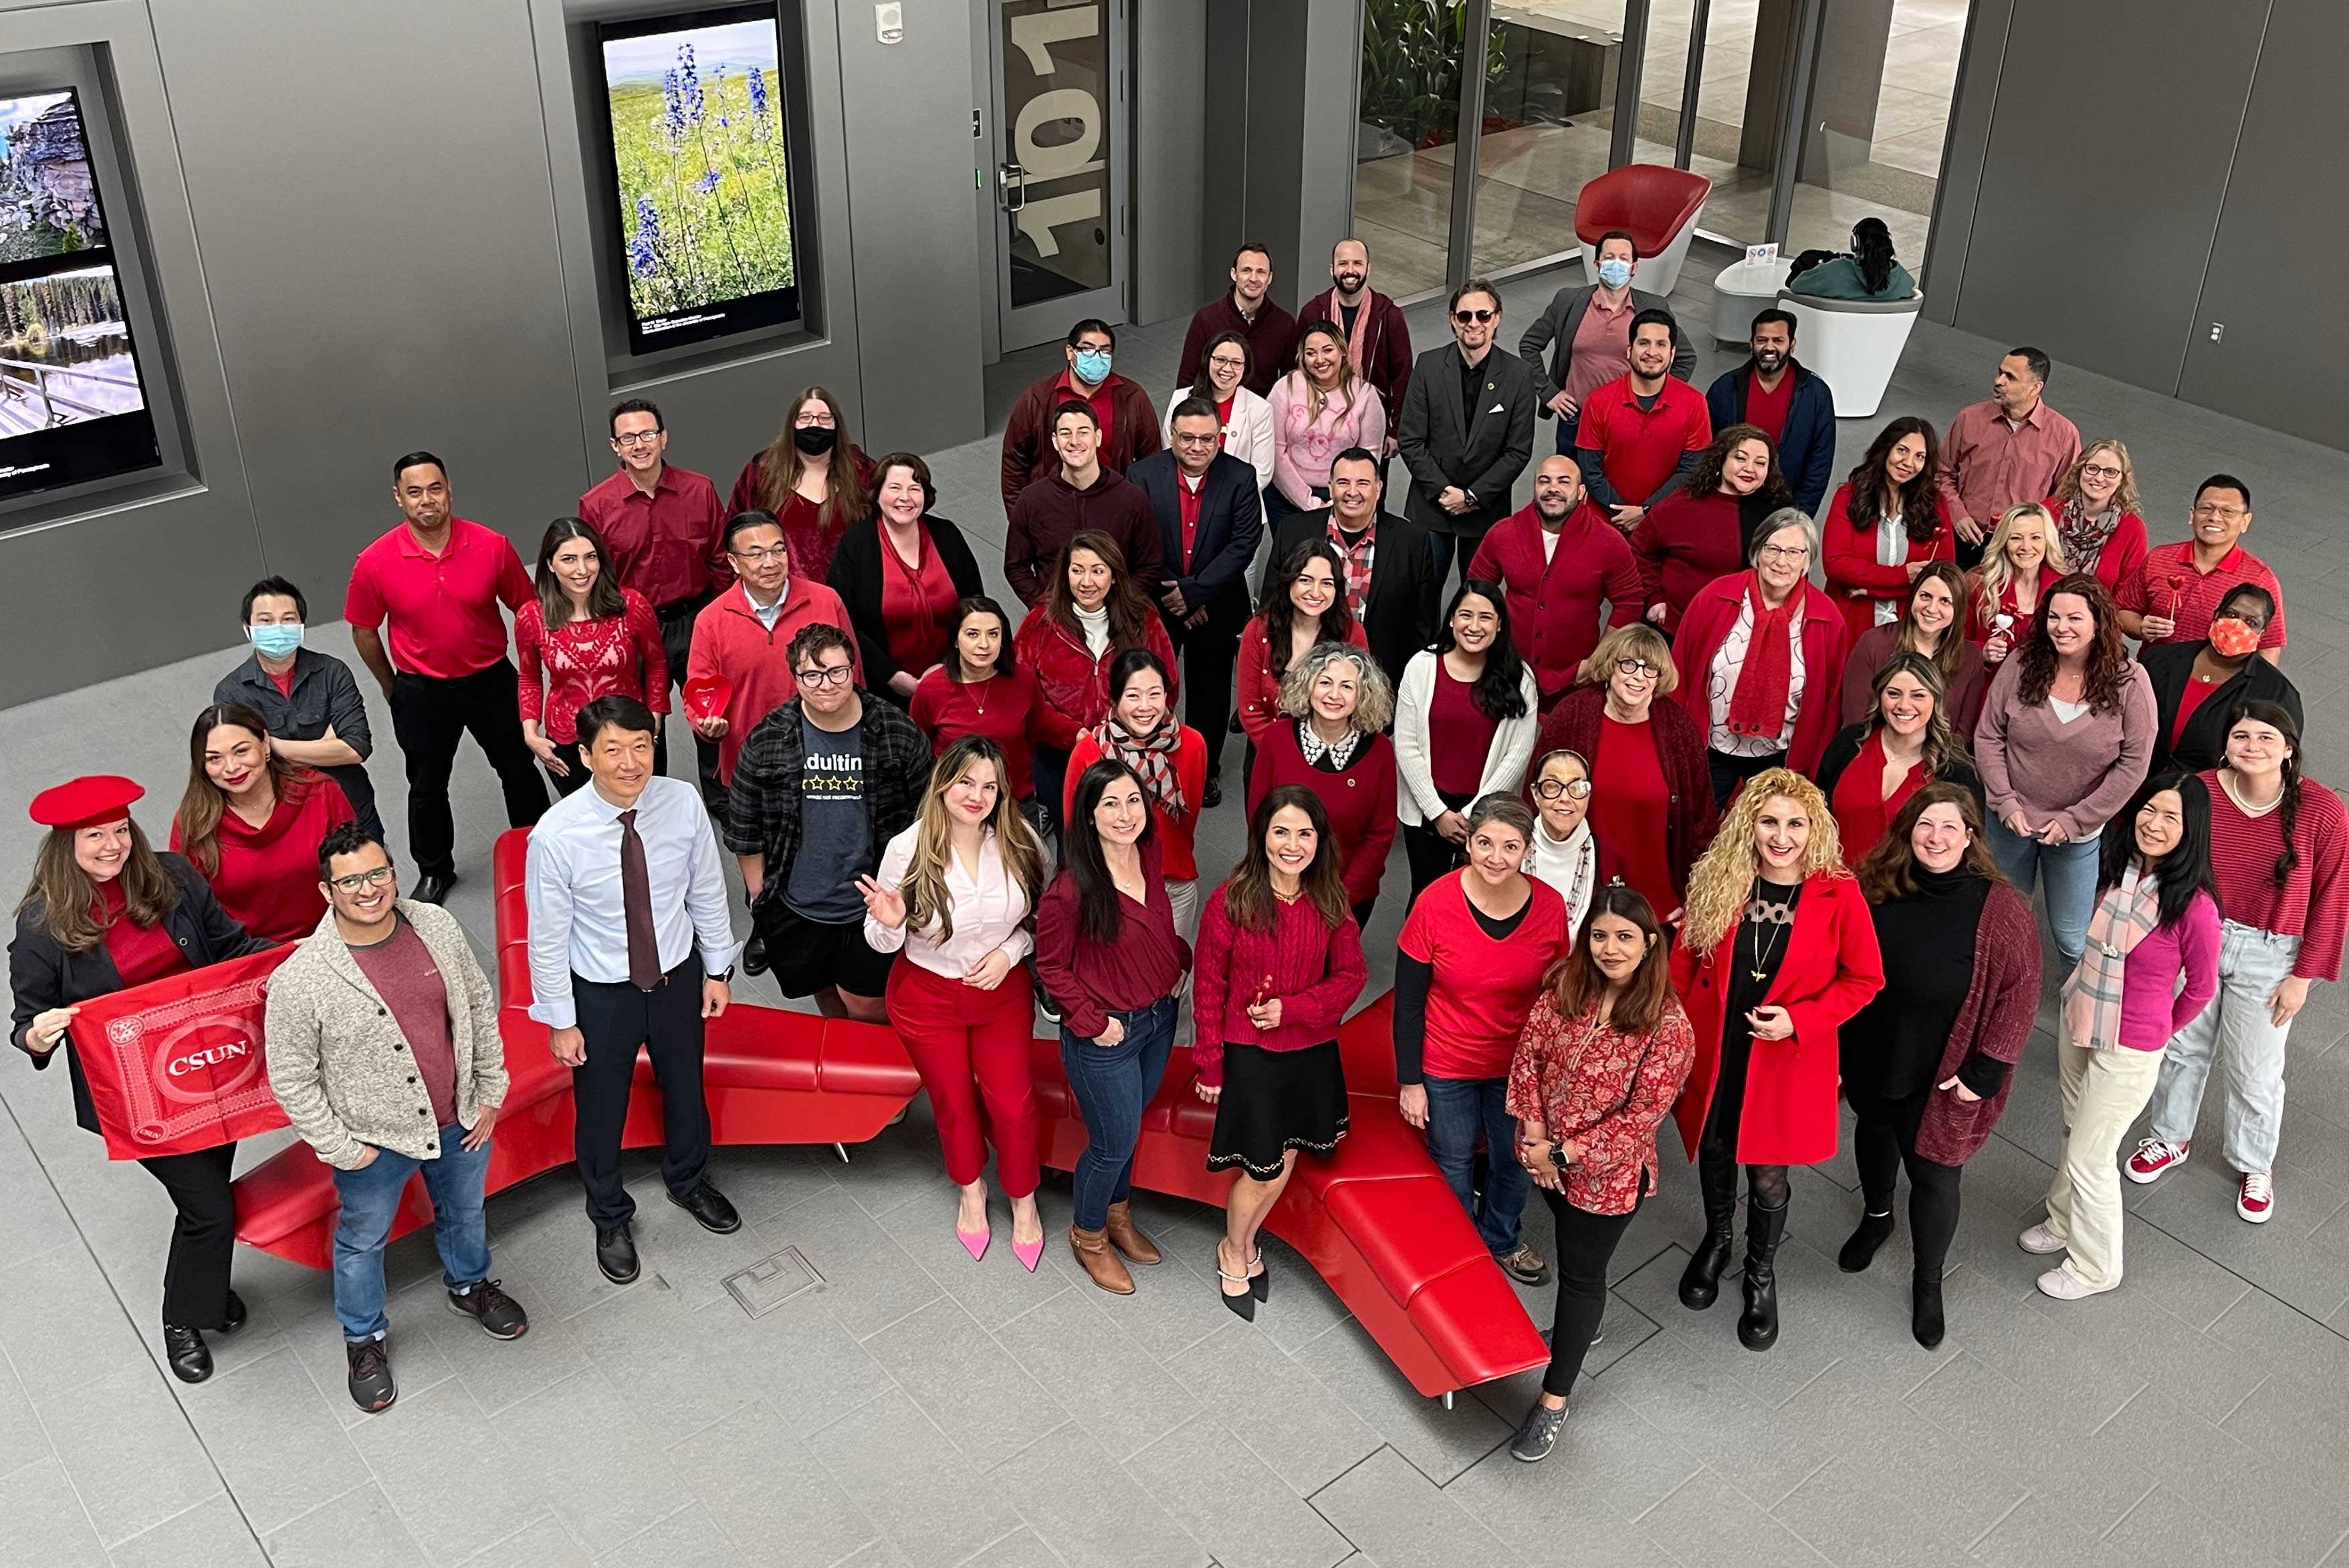 Tseng College staff wearing red standing for Valentines group photo